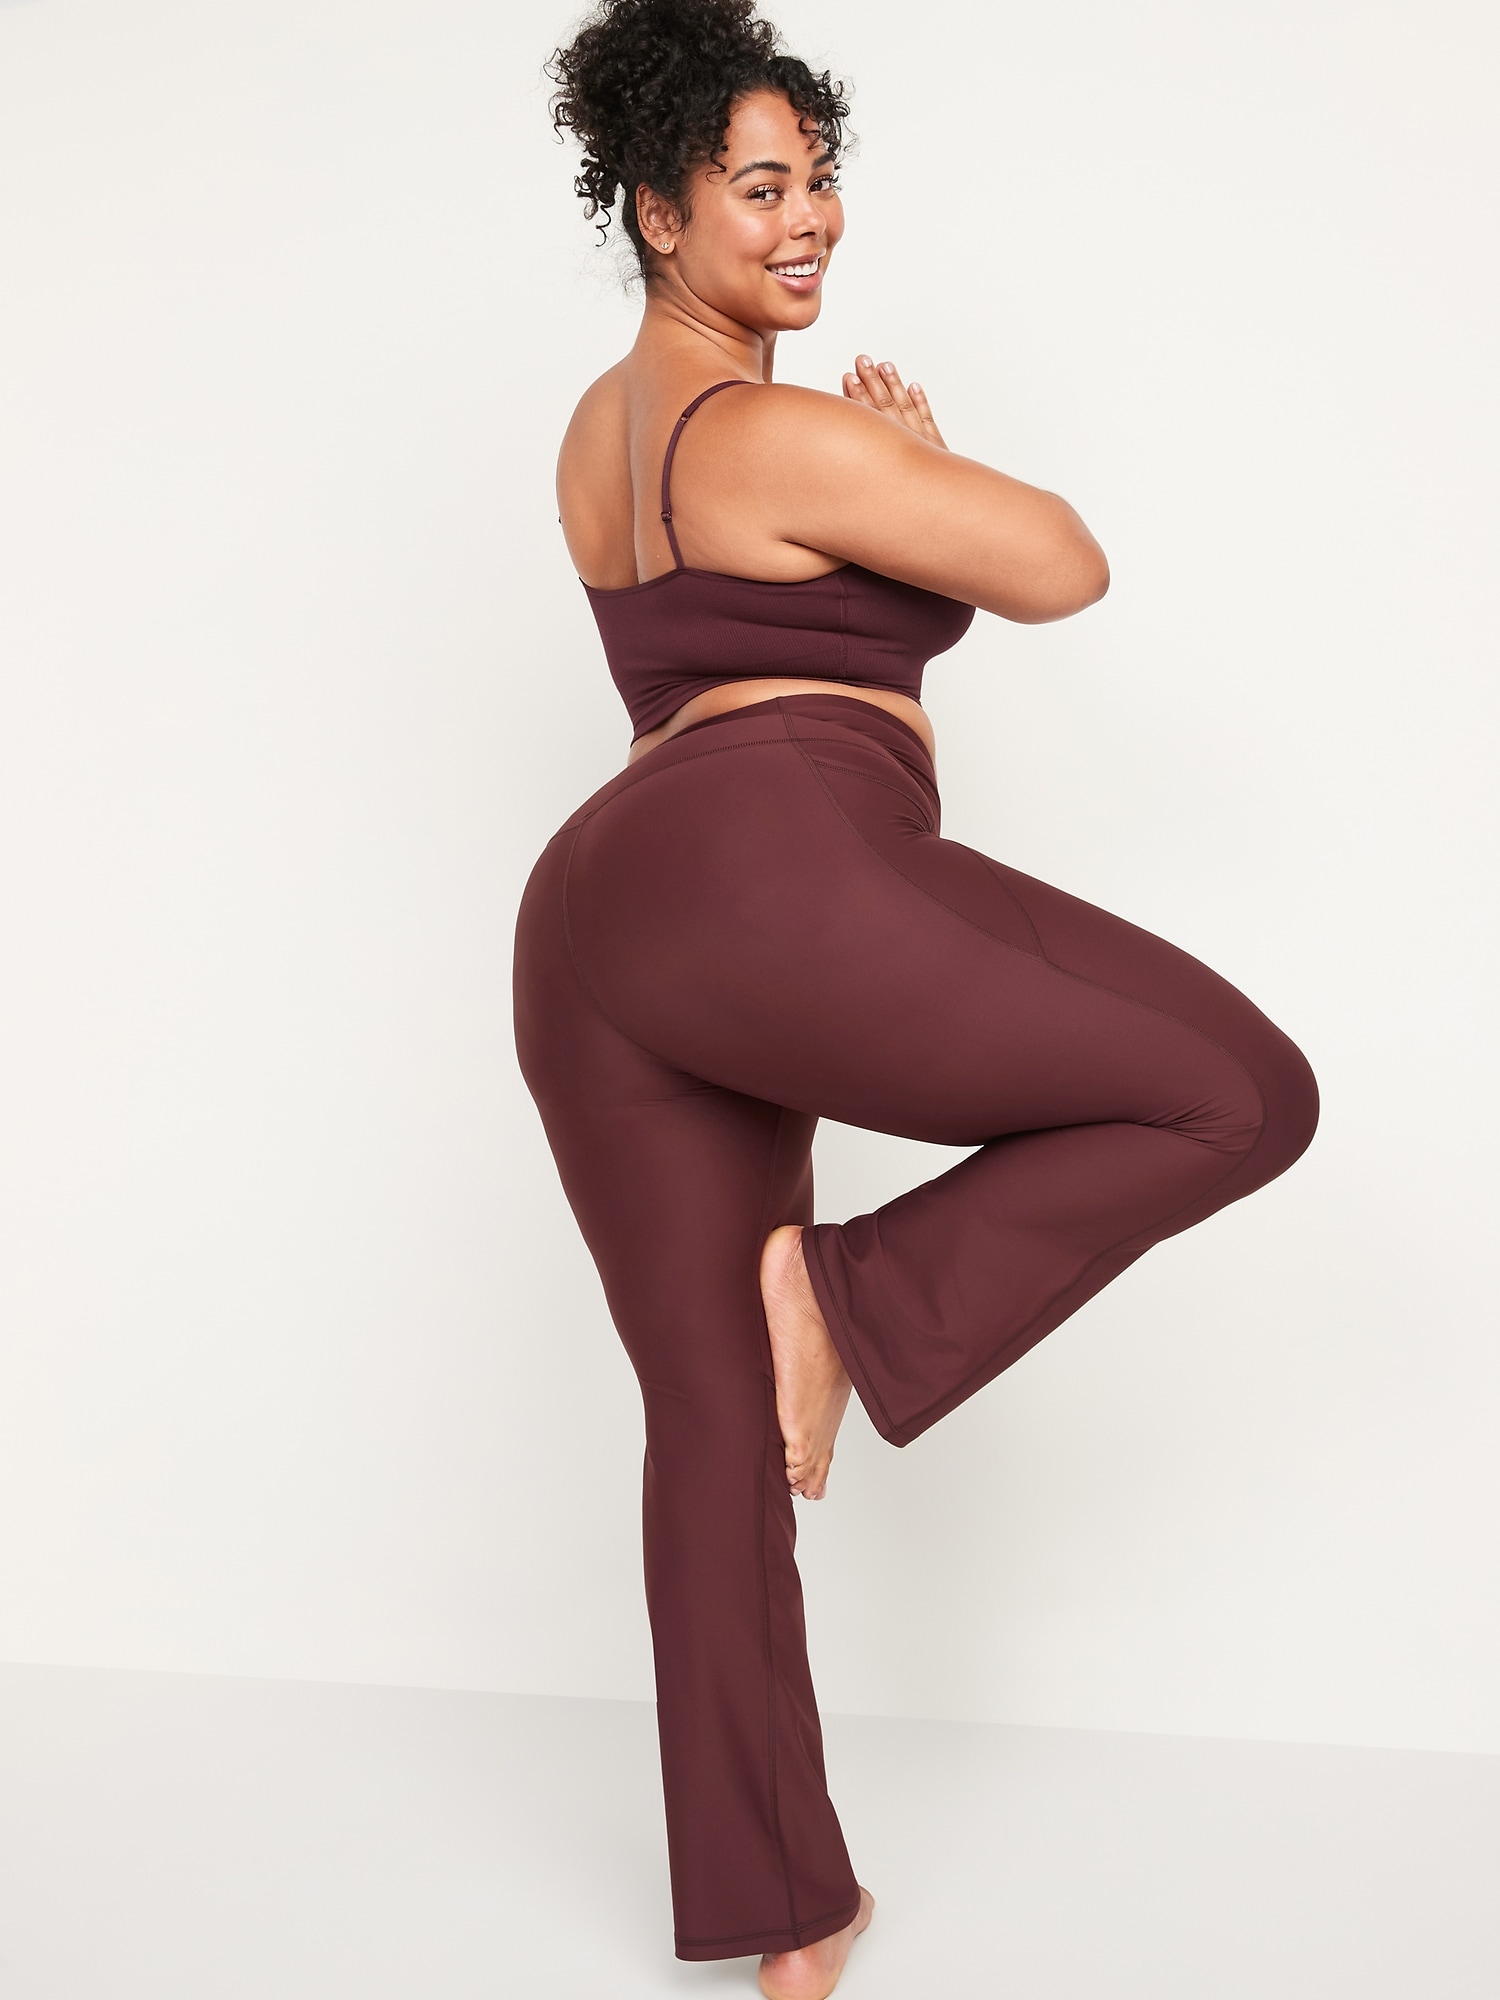 THANTH Bootcut Yoga Pants for Women with Pockets High Waisted